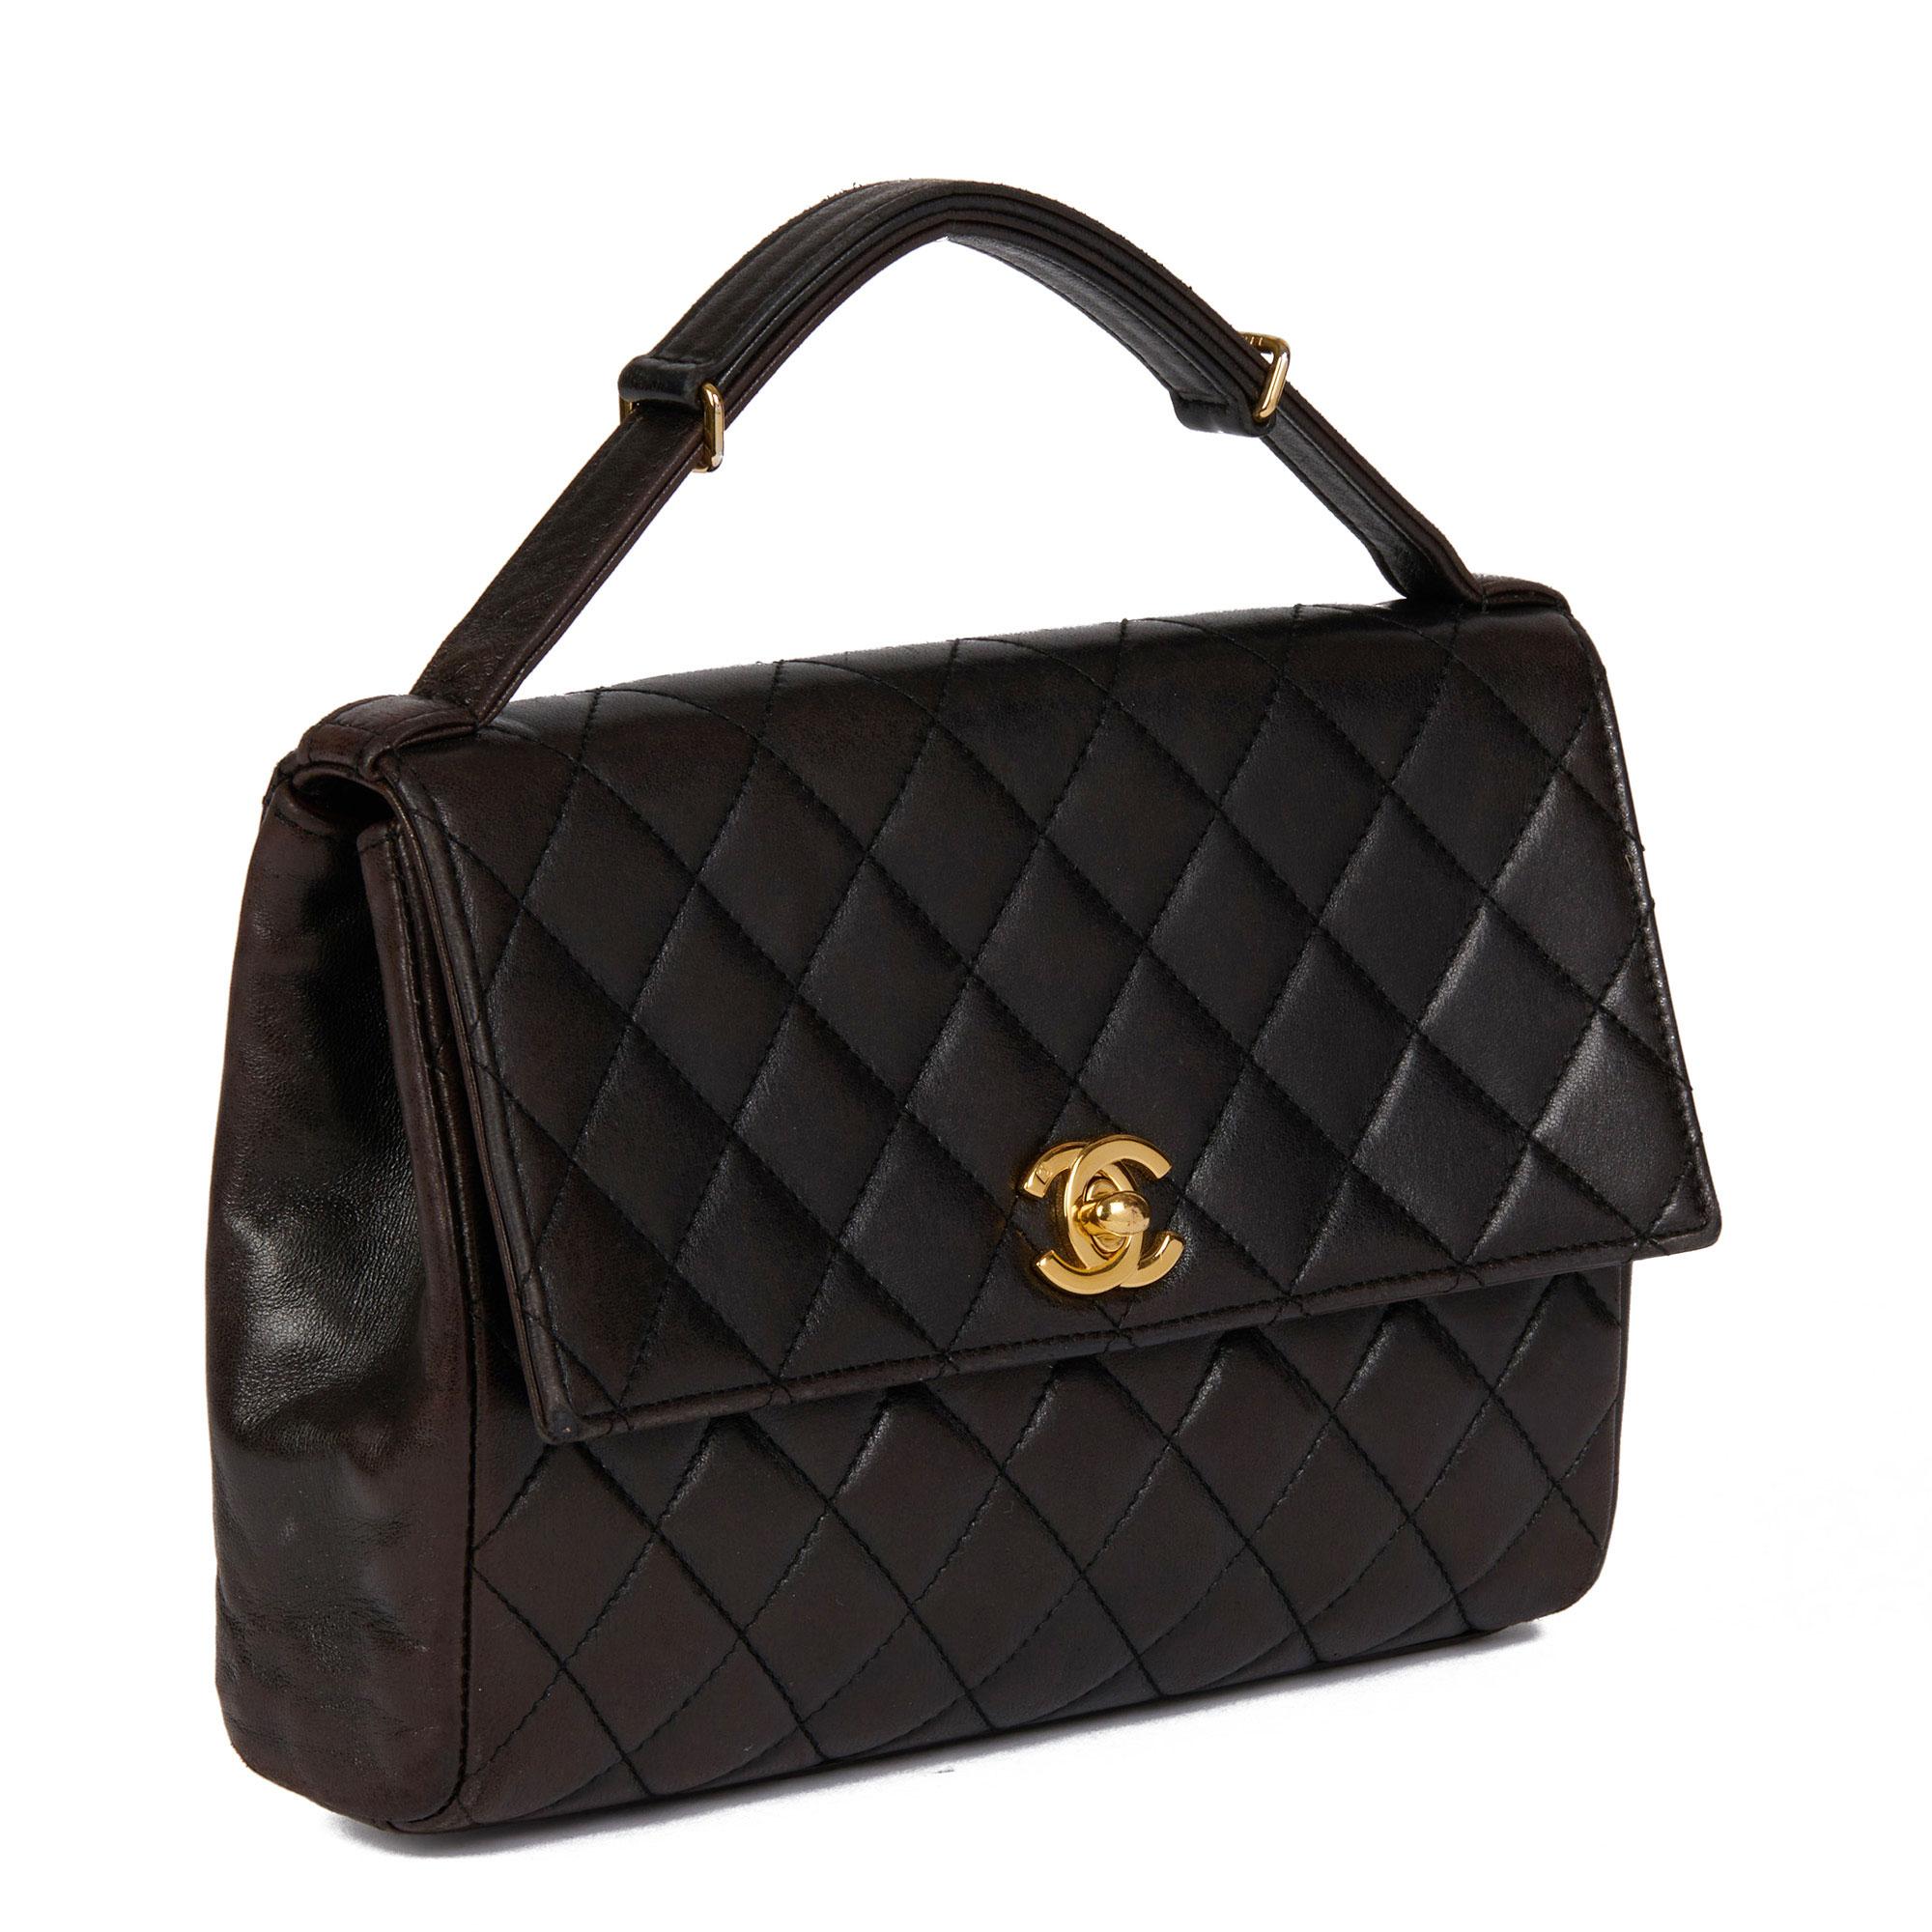 CHANEL
Black Quilted Lambskin Vintage Mini Classic Top Handle Flap Bag

Serial Number: 5475800
Age (Circa): 1997
Accompanied By: Chanel Dust Bag, Authenticity Card, Care Booklet
Authenticity Details: Authenticity Card, Serial Sticker (Made in